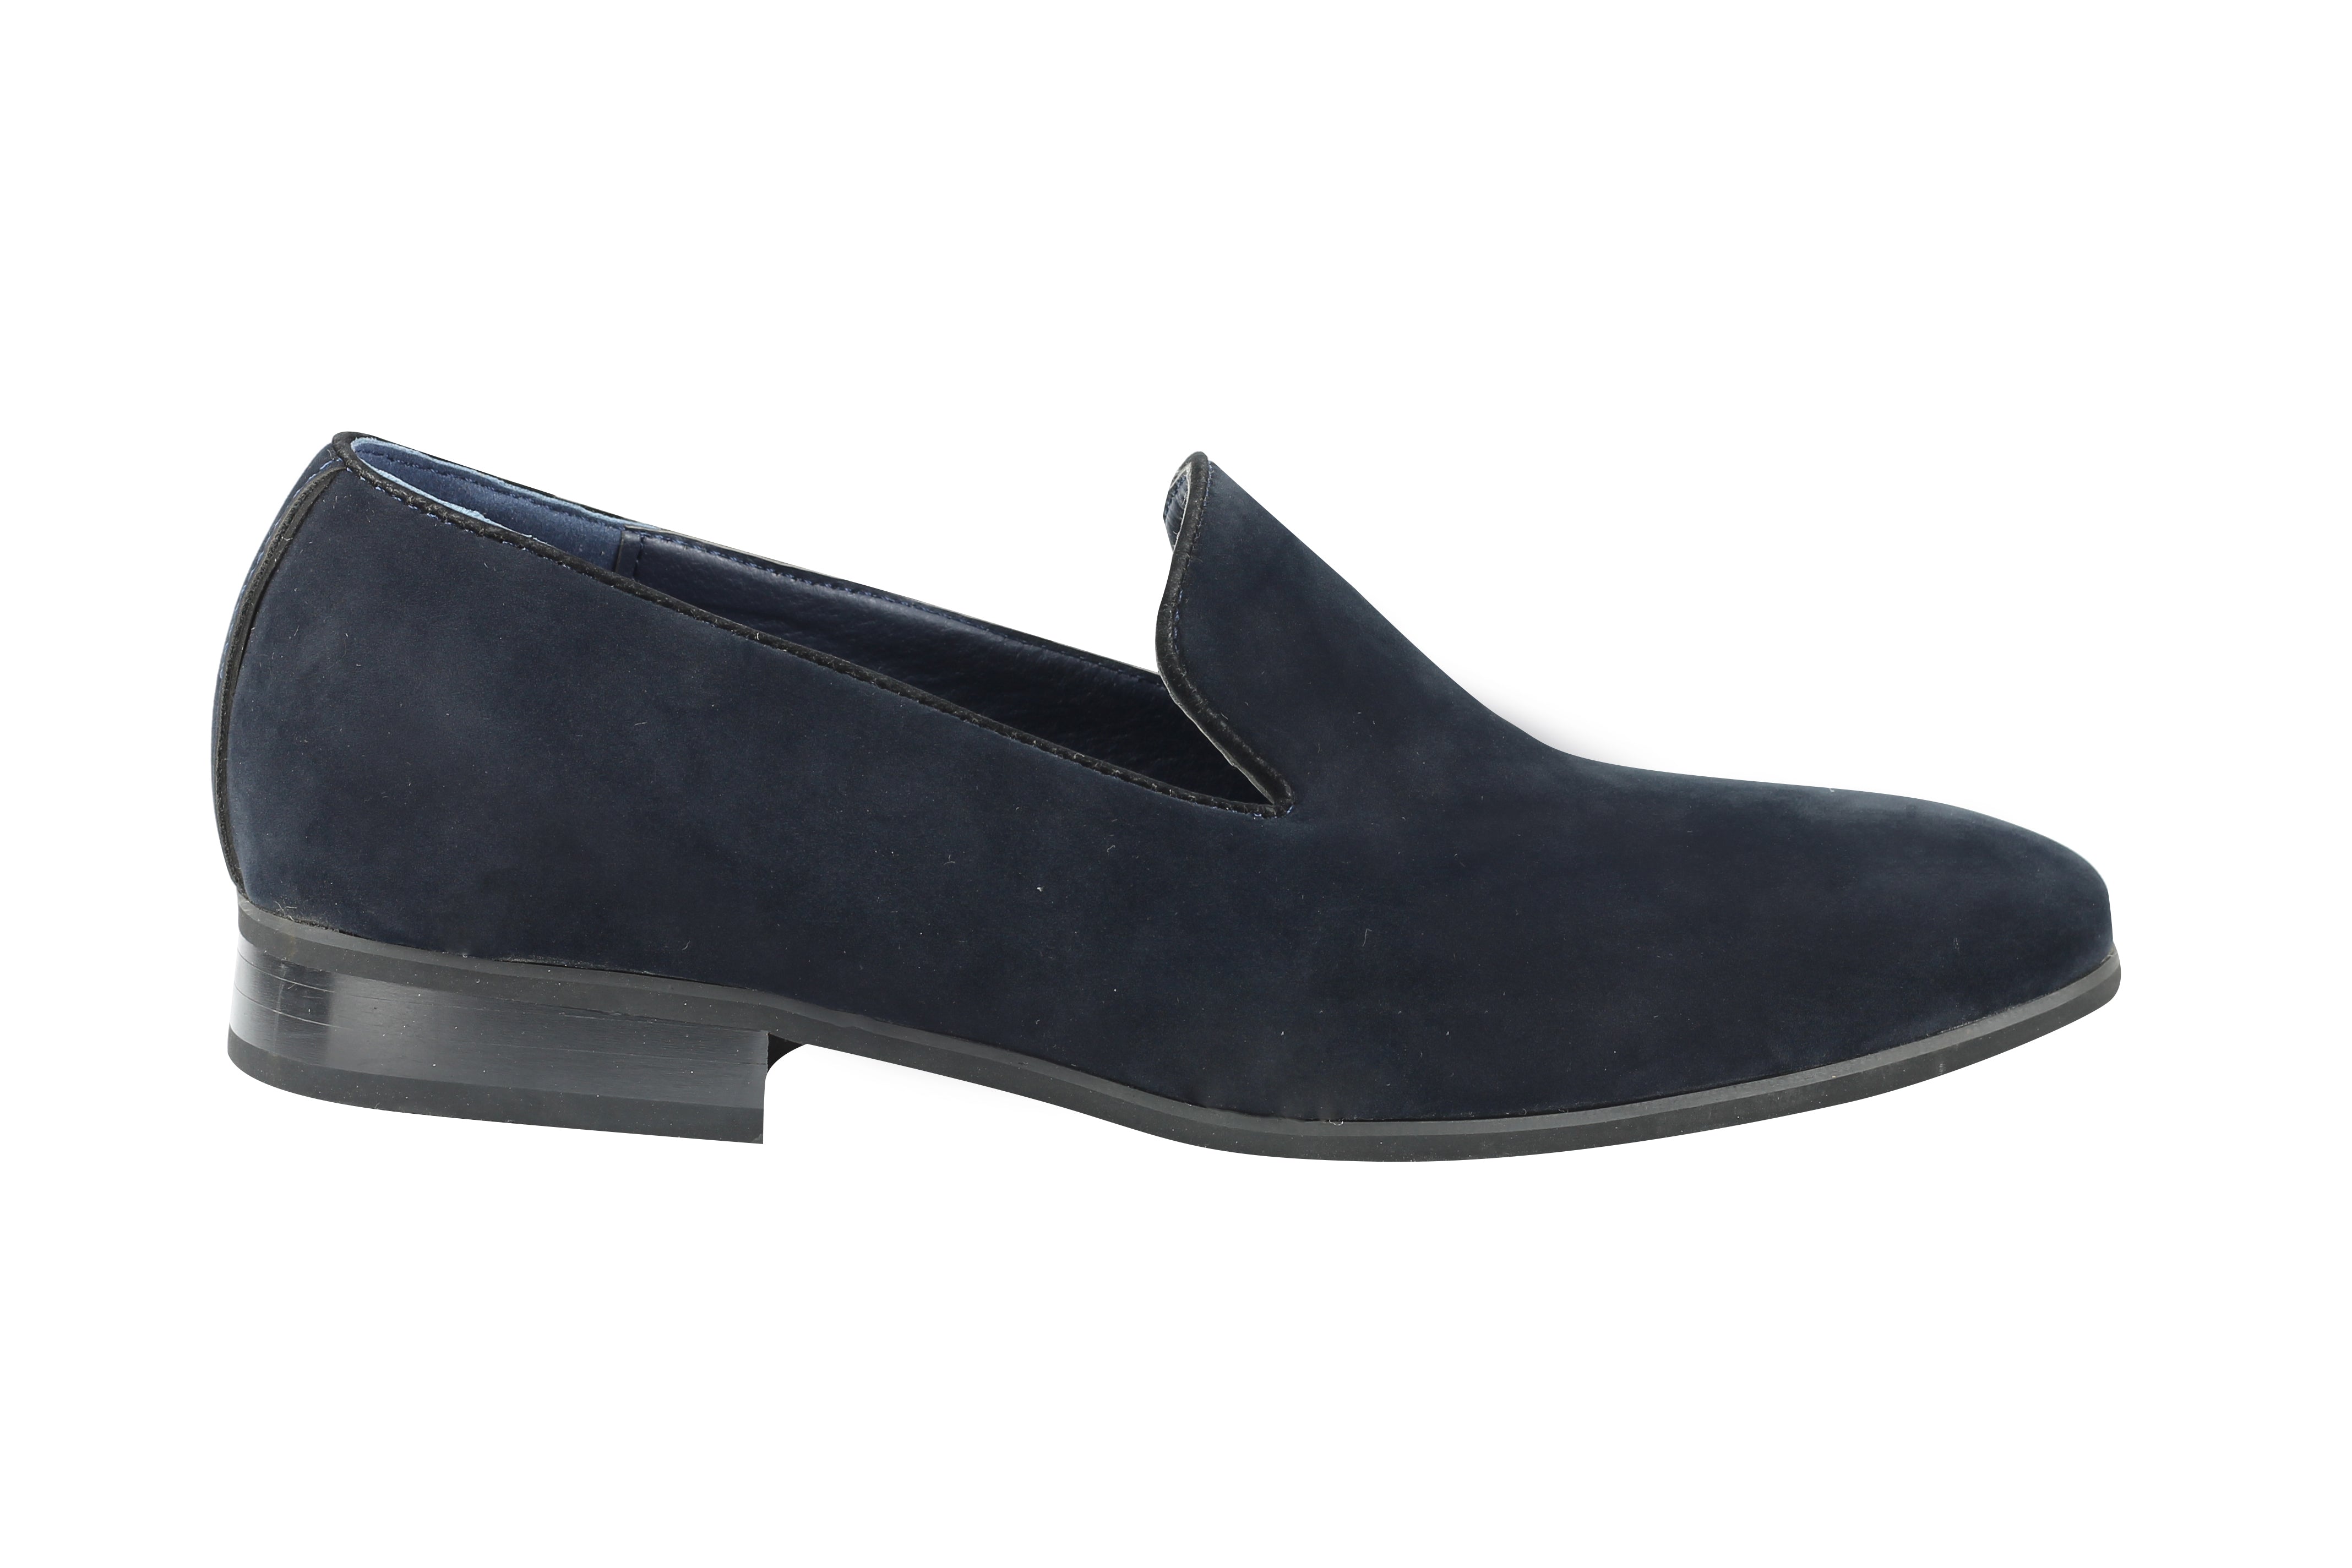 Suede Leather Slip On Shoes In Navy